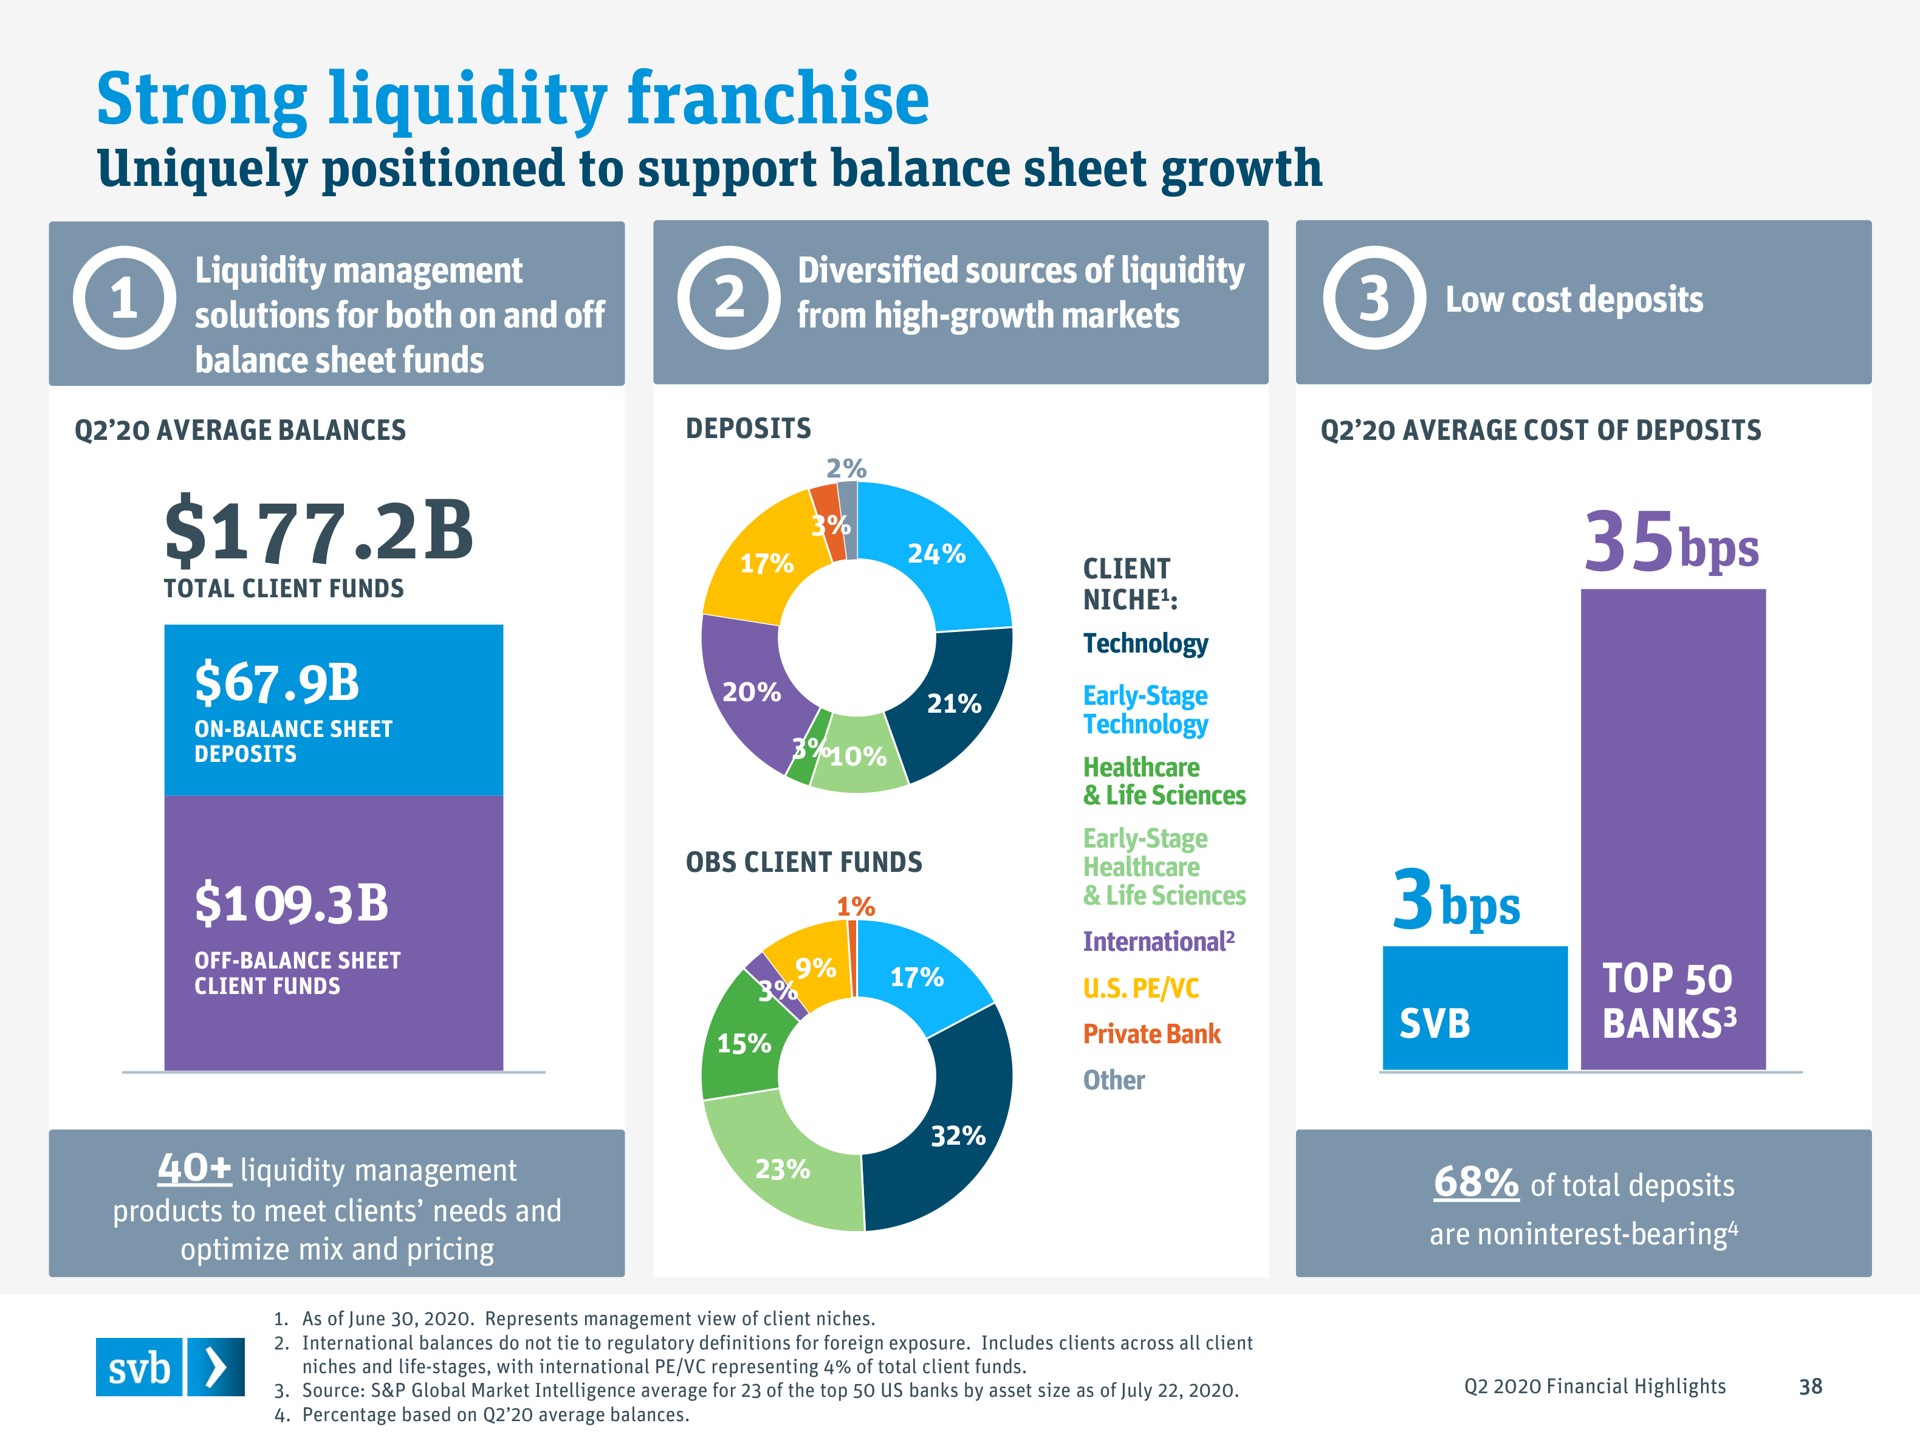 strong liquidity franchise uniquely positioned to support balance sheet growth | Silicon Valley Bank